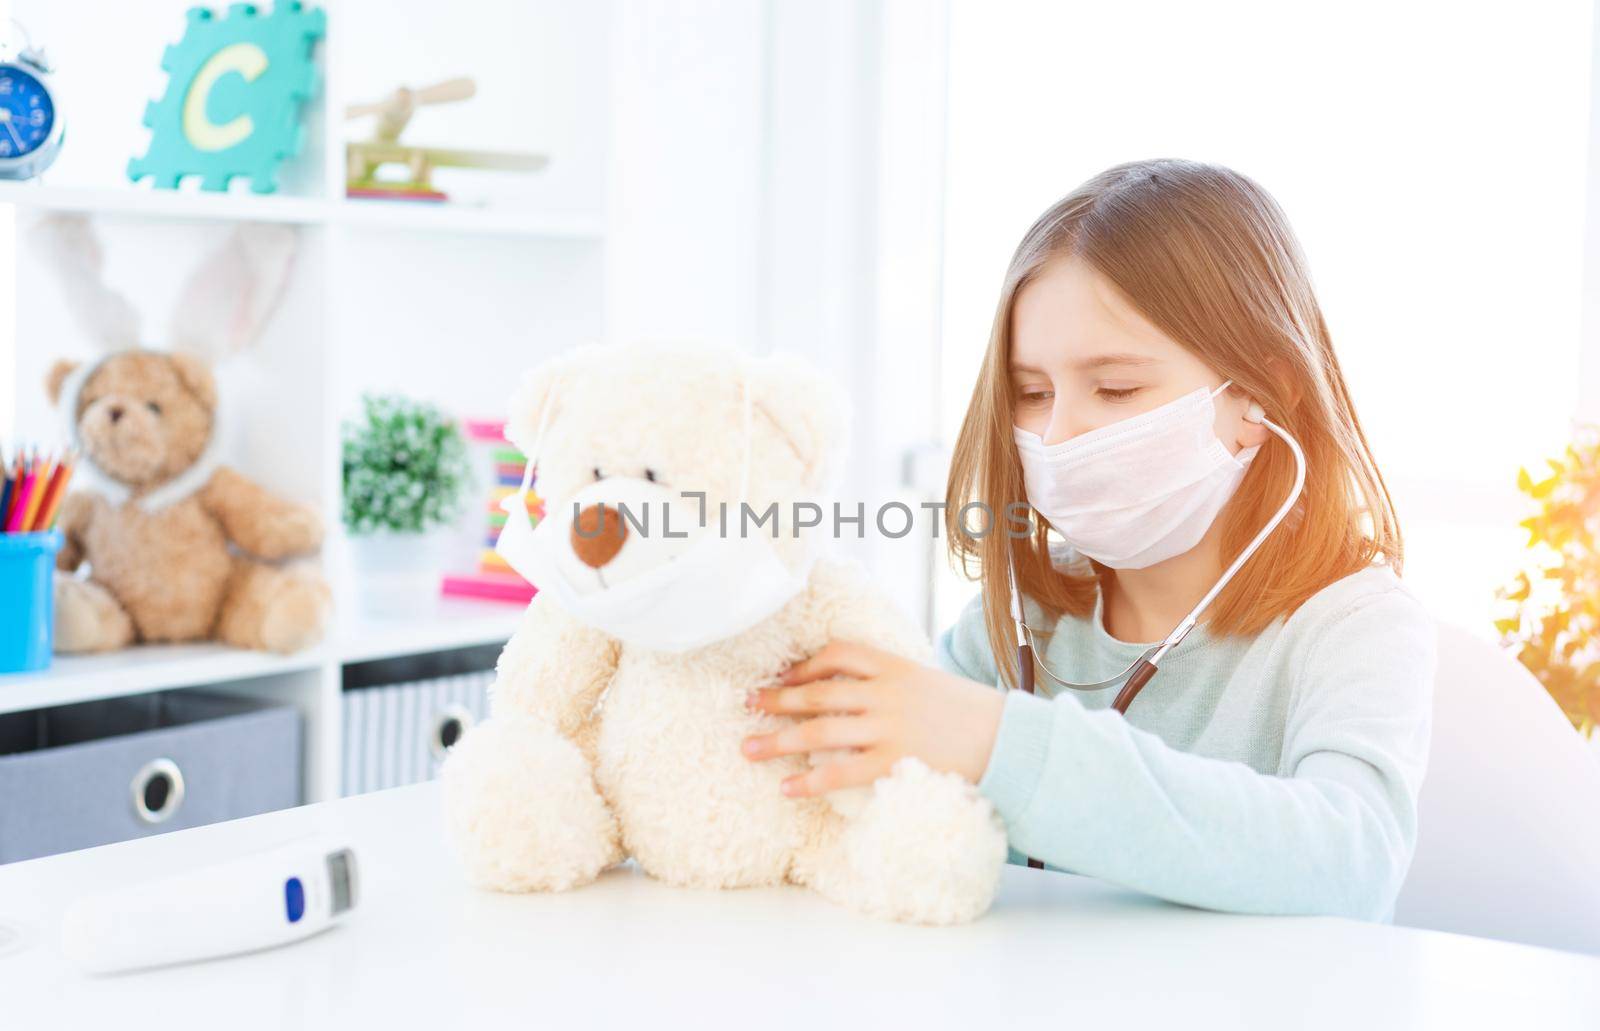 Cute little girl playing with teddy bear in light room